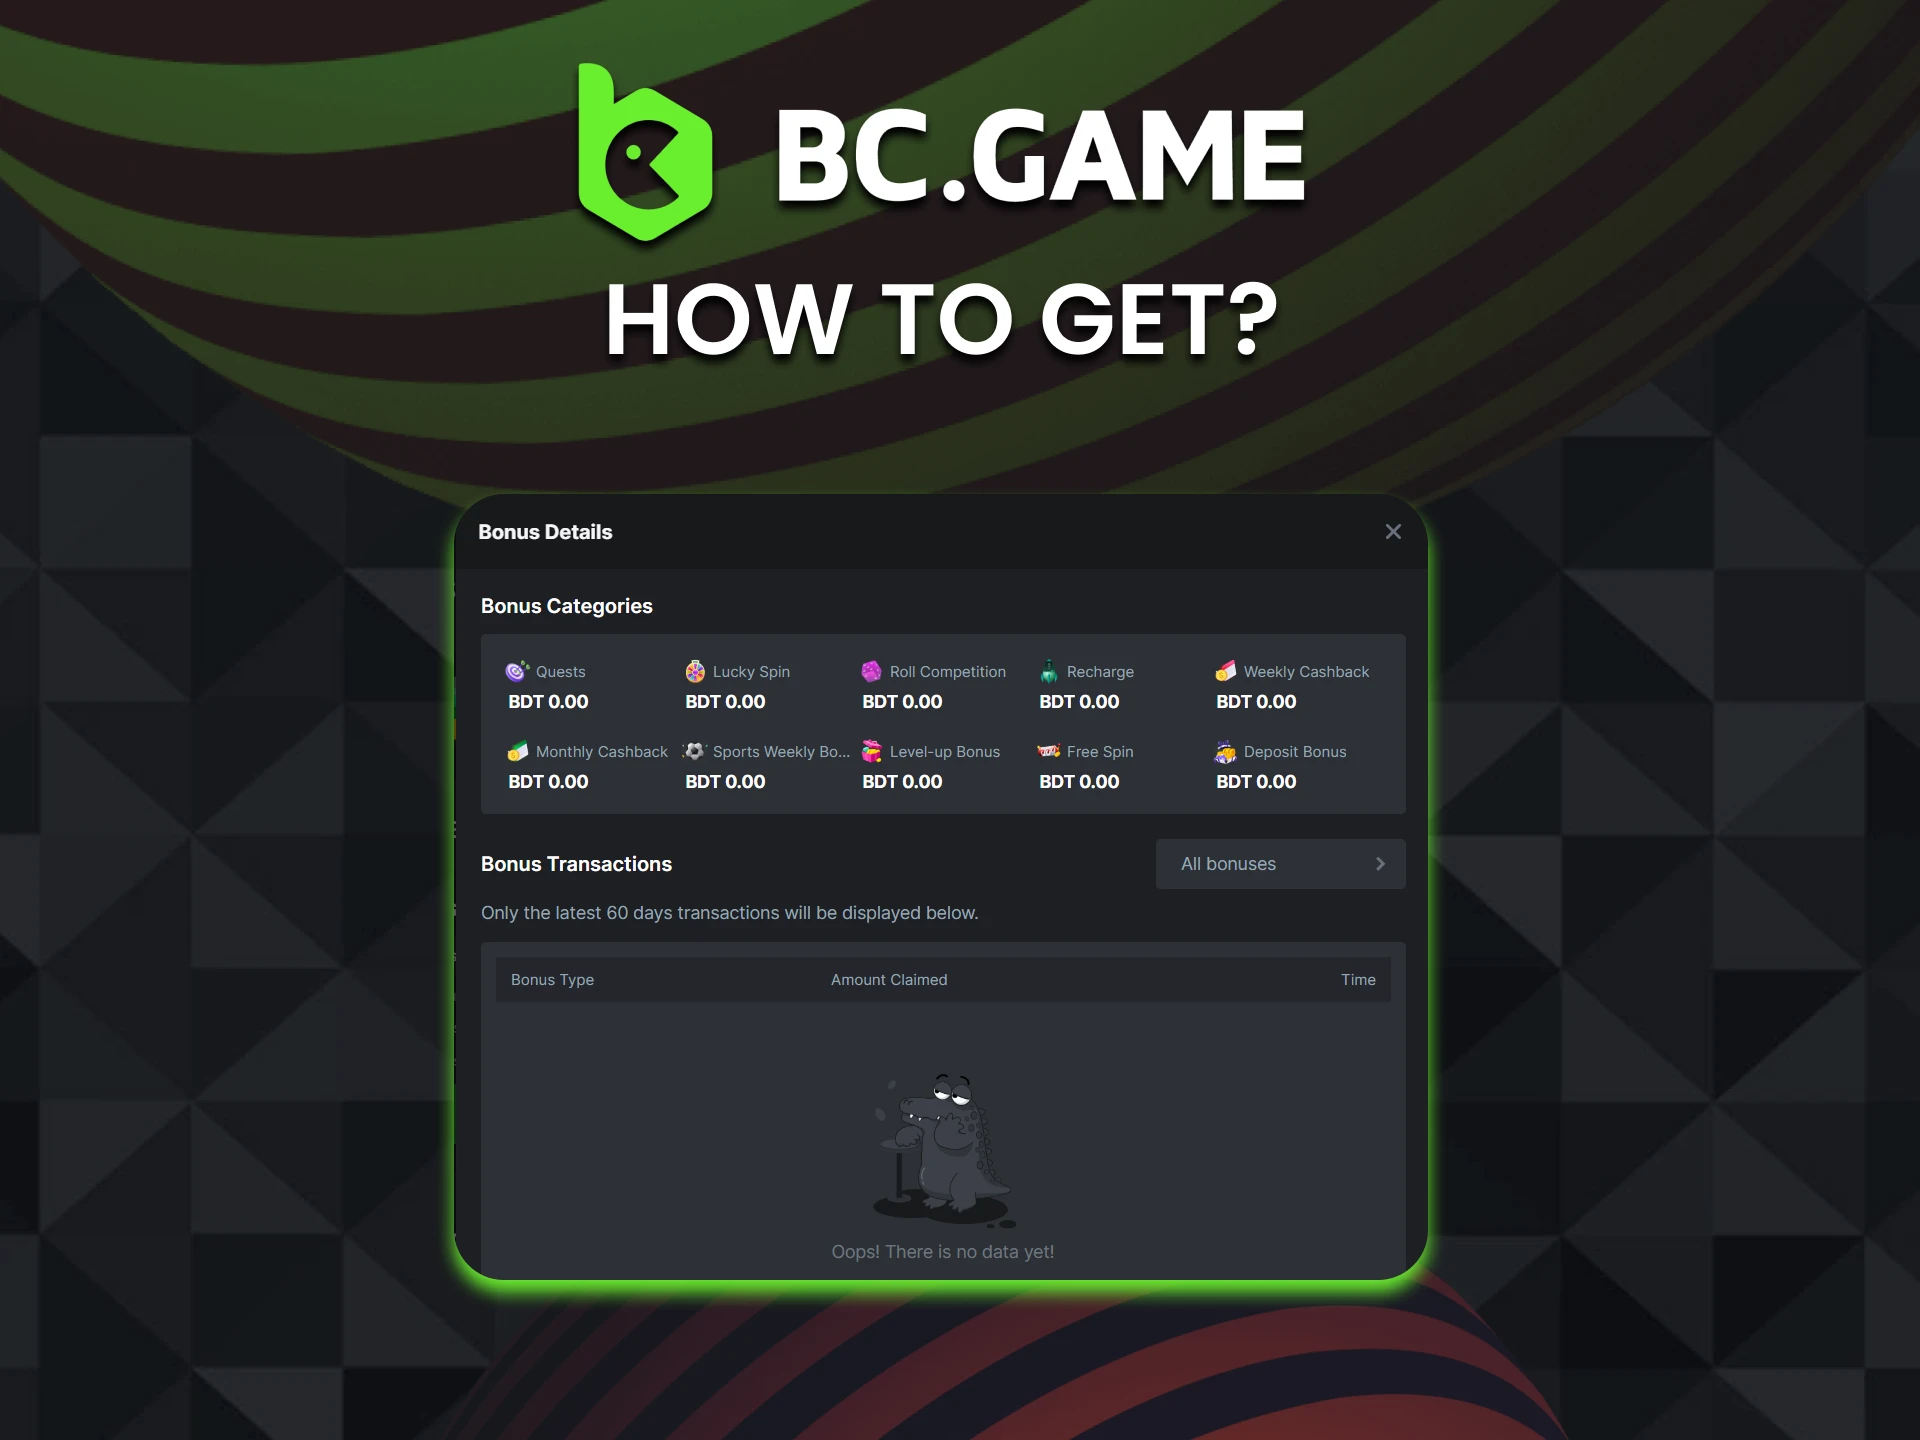 Register an account and deposit to get BC Game bonus.